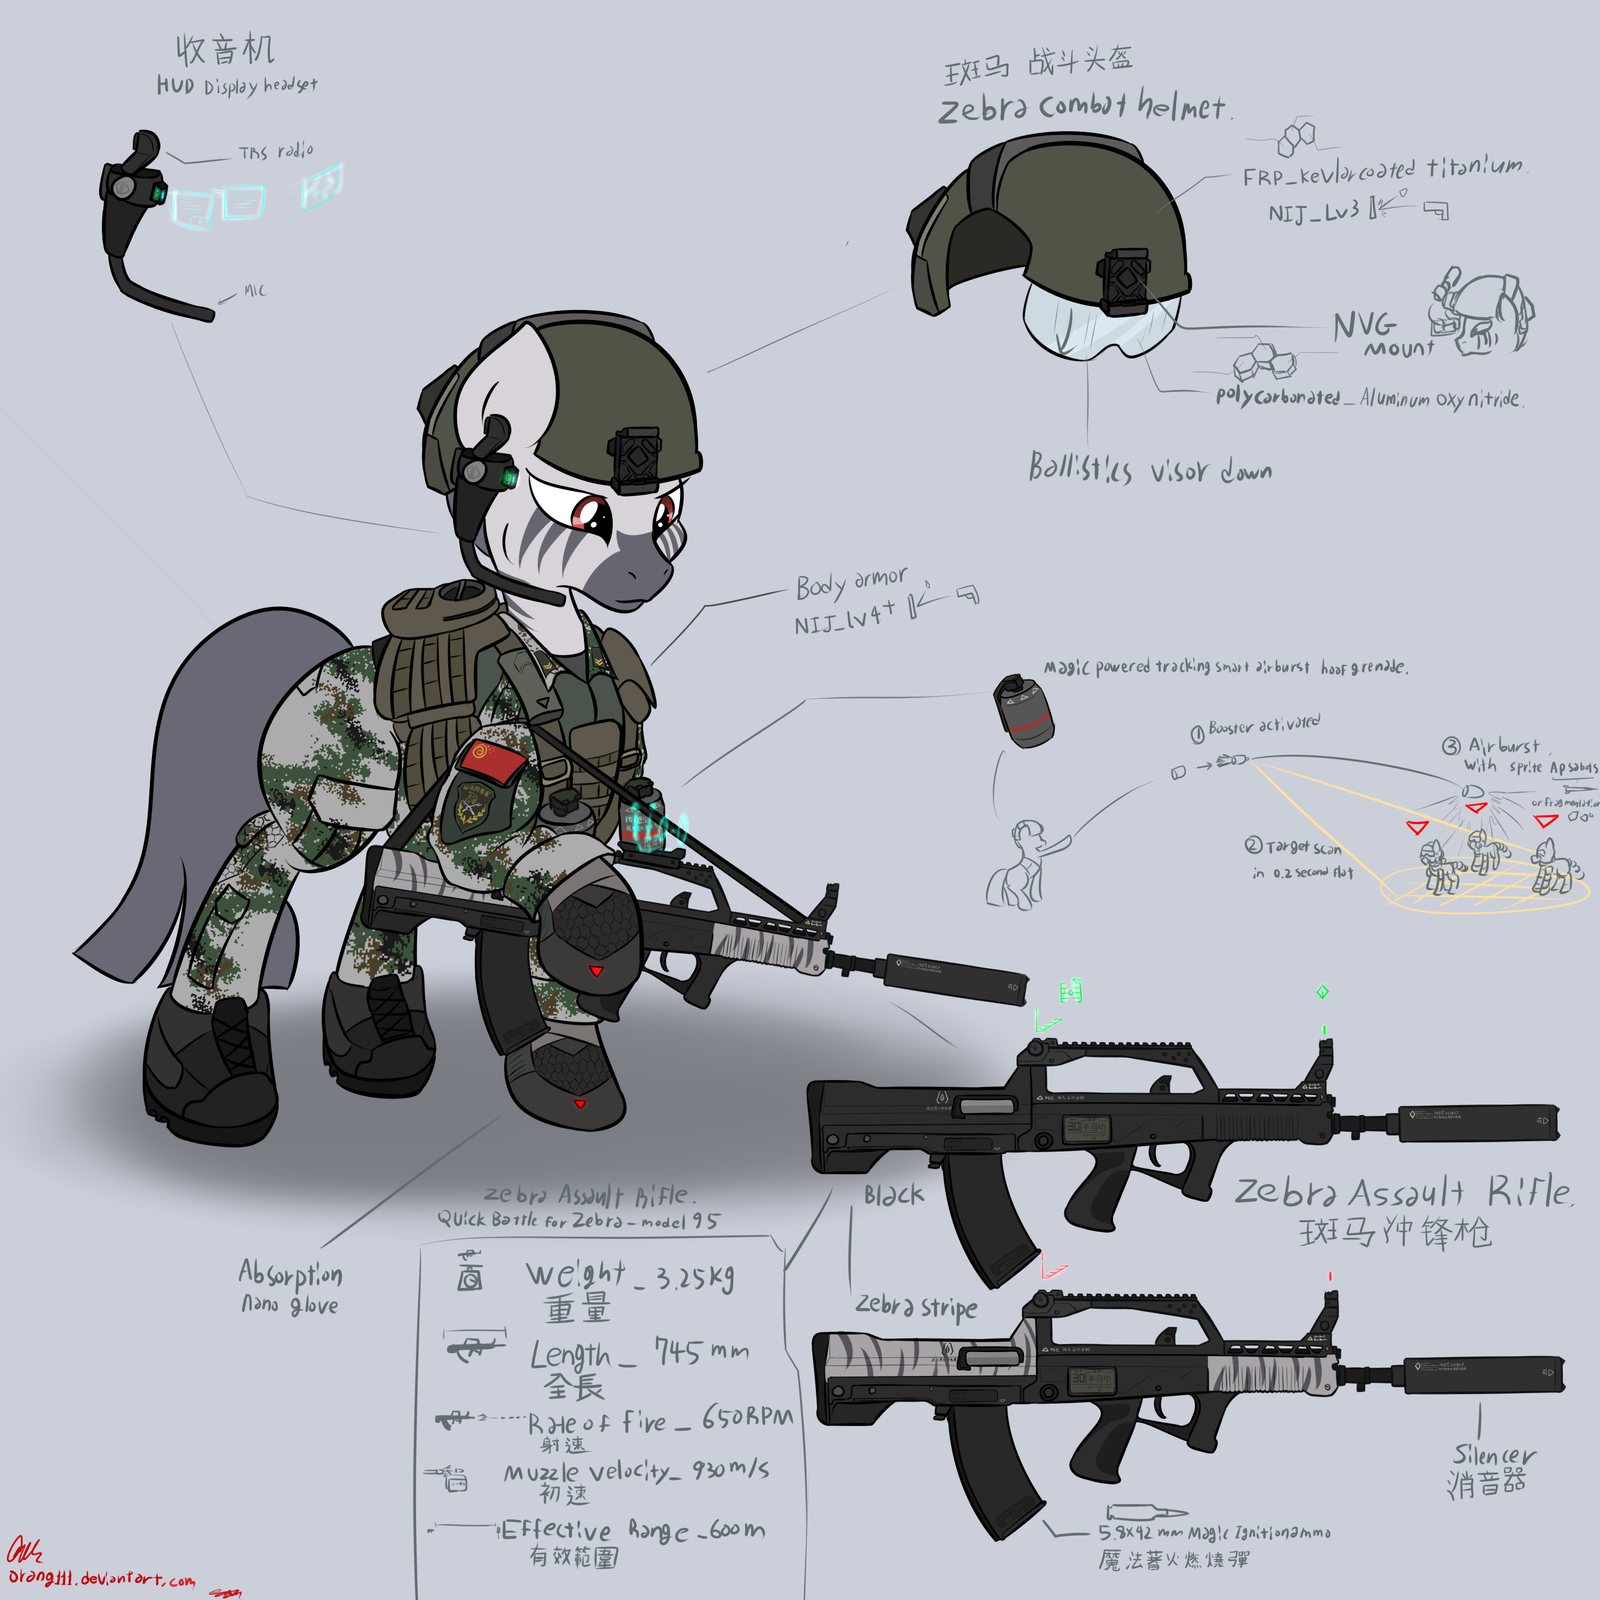 Ready for the task. - My little pony, MLP Zebra, Original character, Weapon, Special Agent